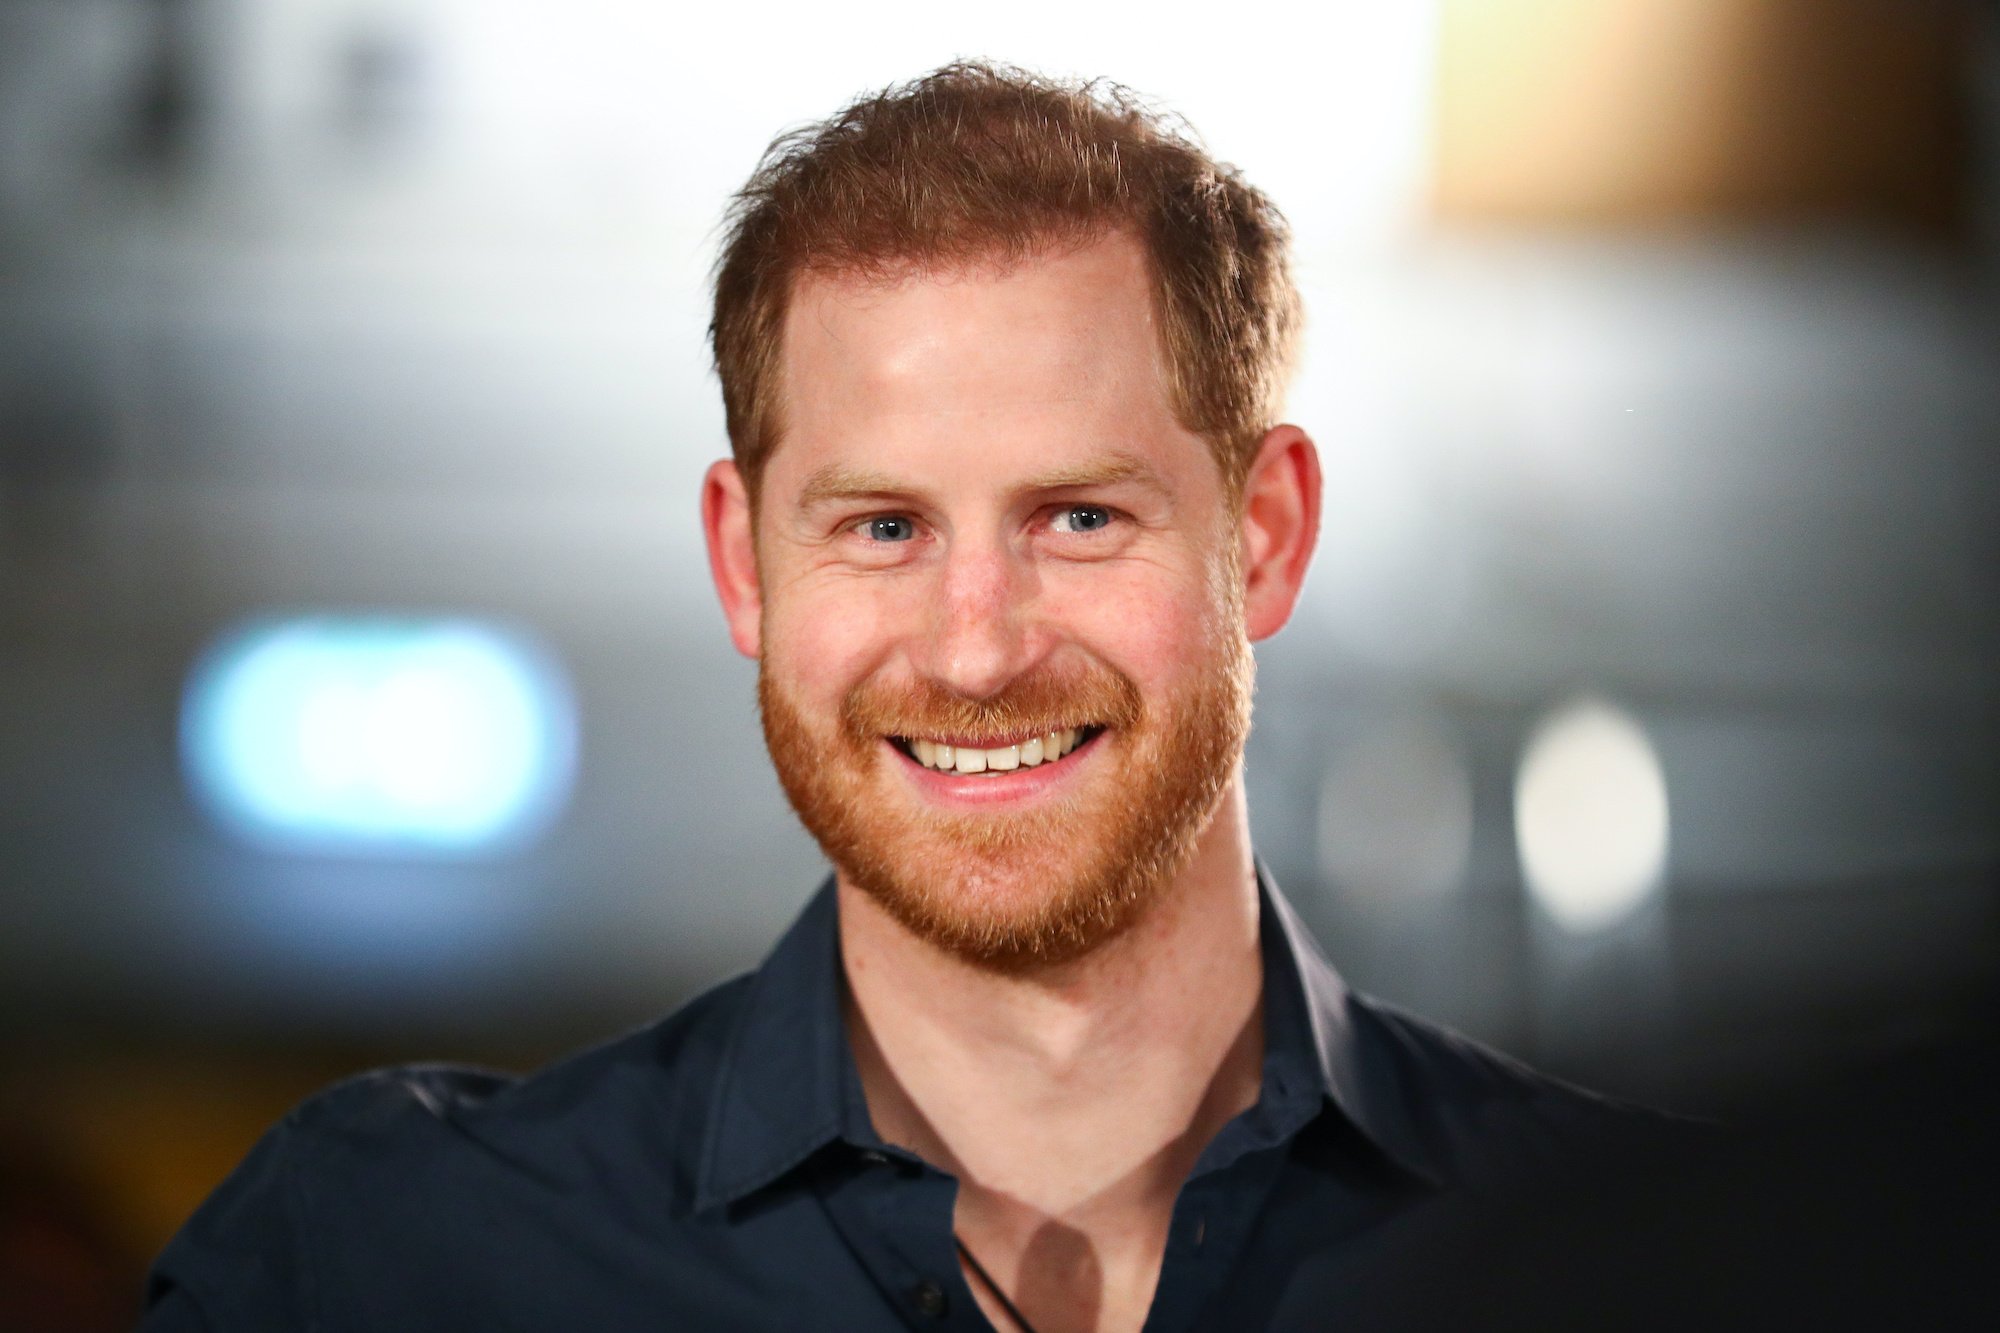 Prince Harry’s New Executive Job Has An Average Starting Salary of $100,000 — But He’s Likely Making Way More